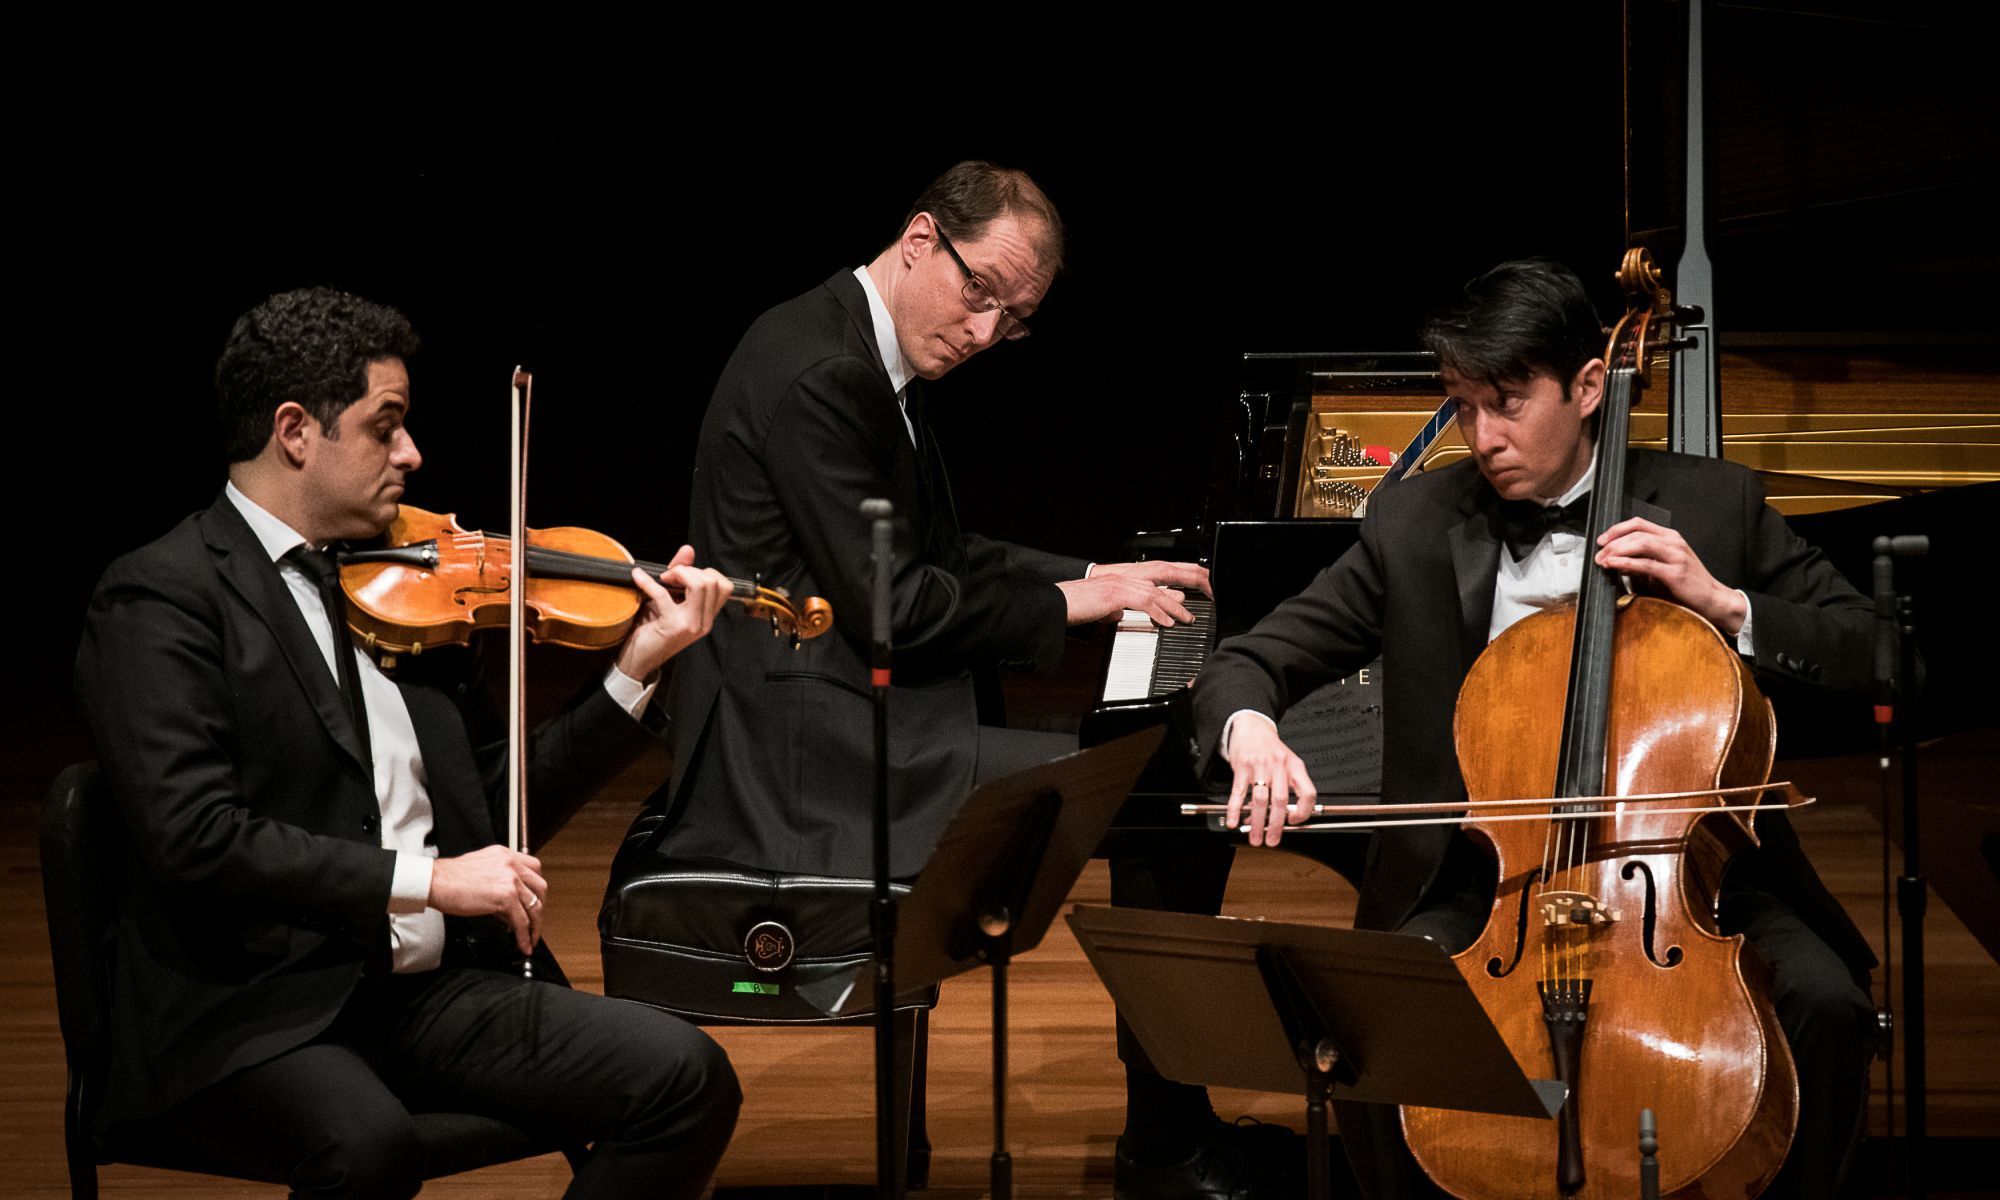 The Chamber Music Society of Lincoln Center performing Reflections